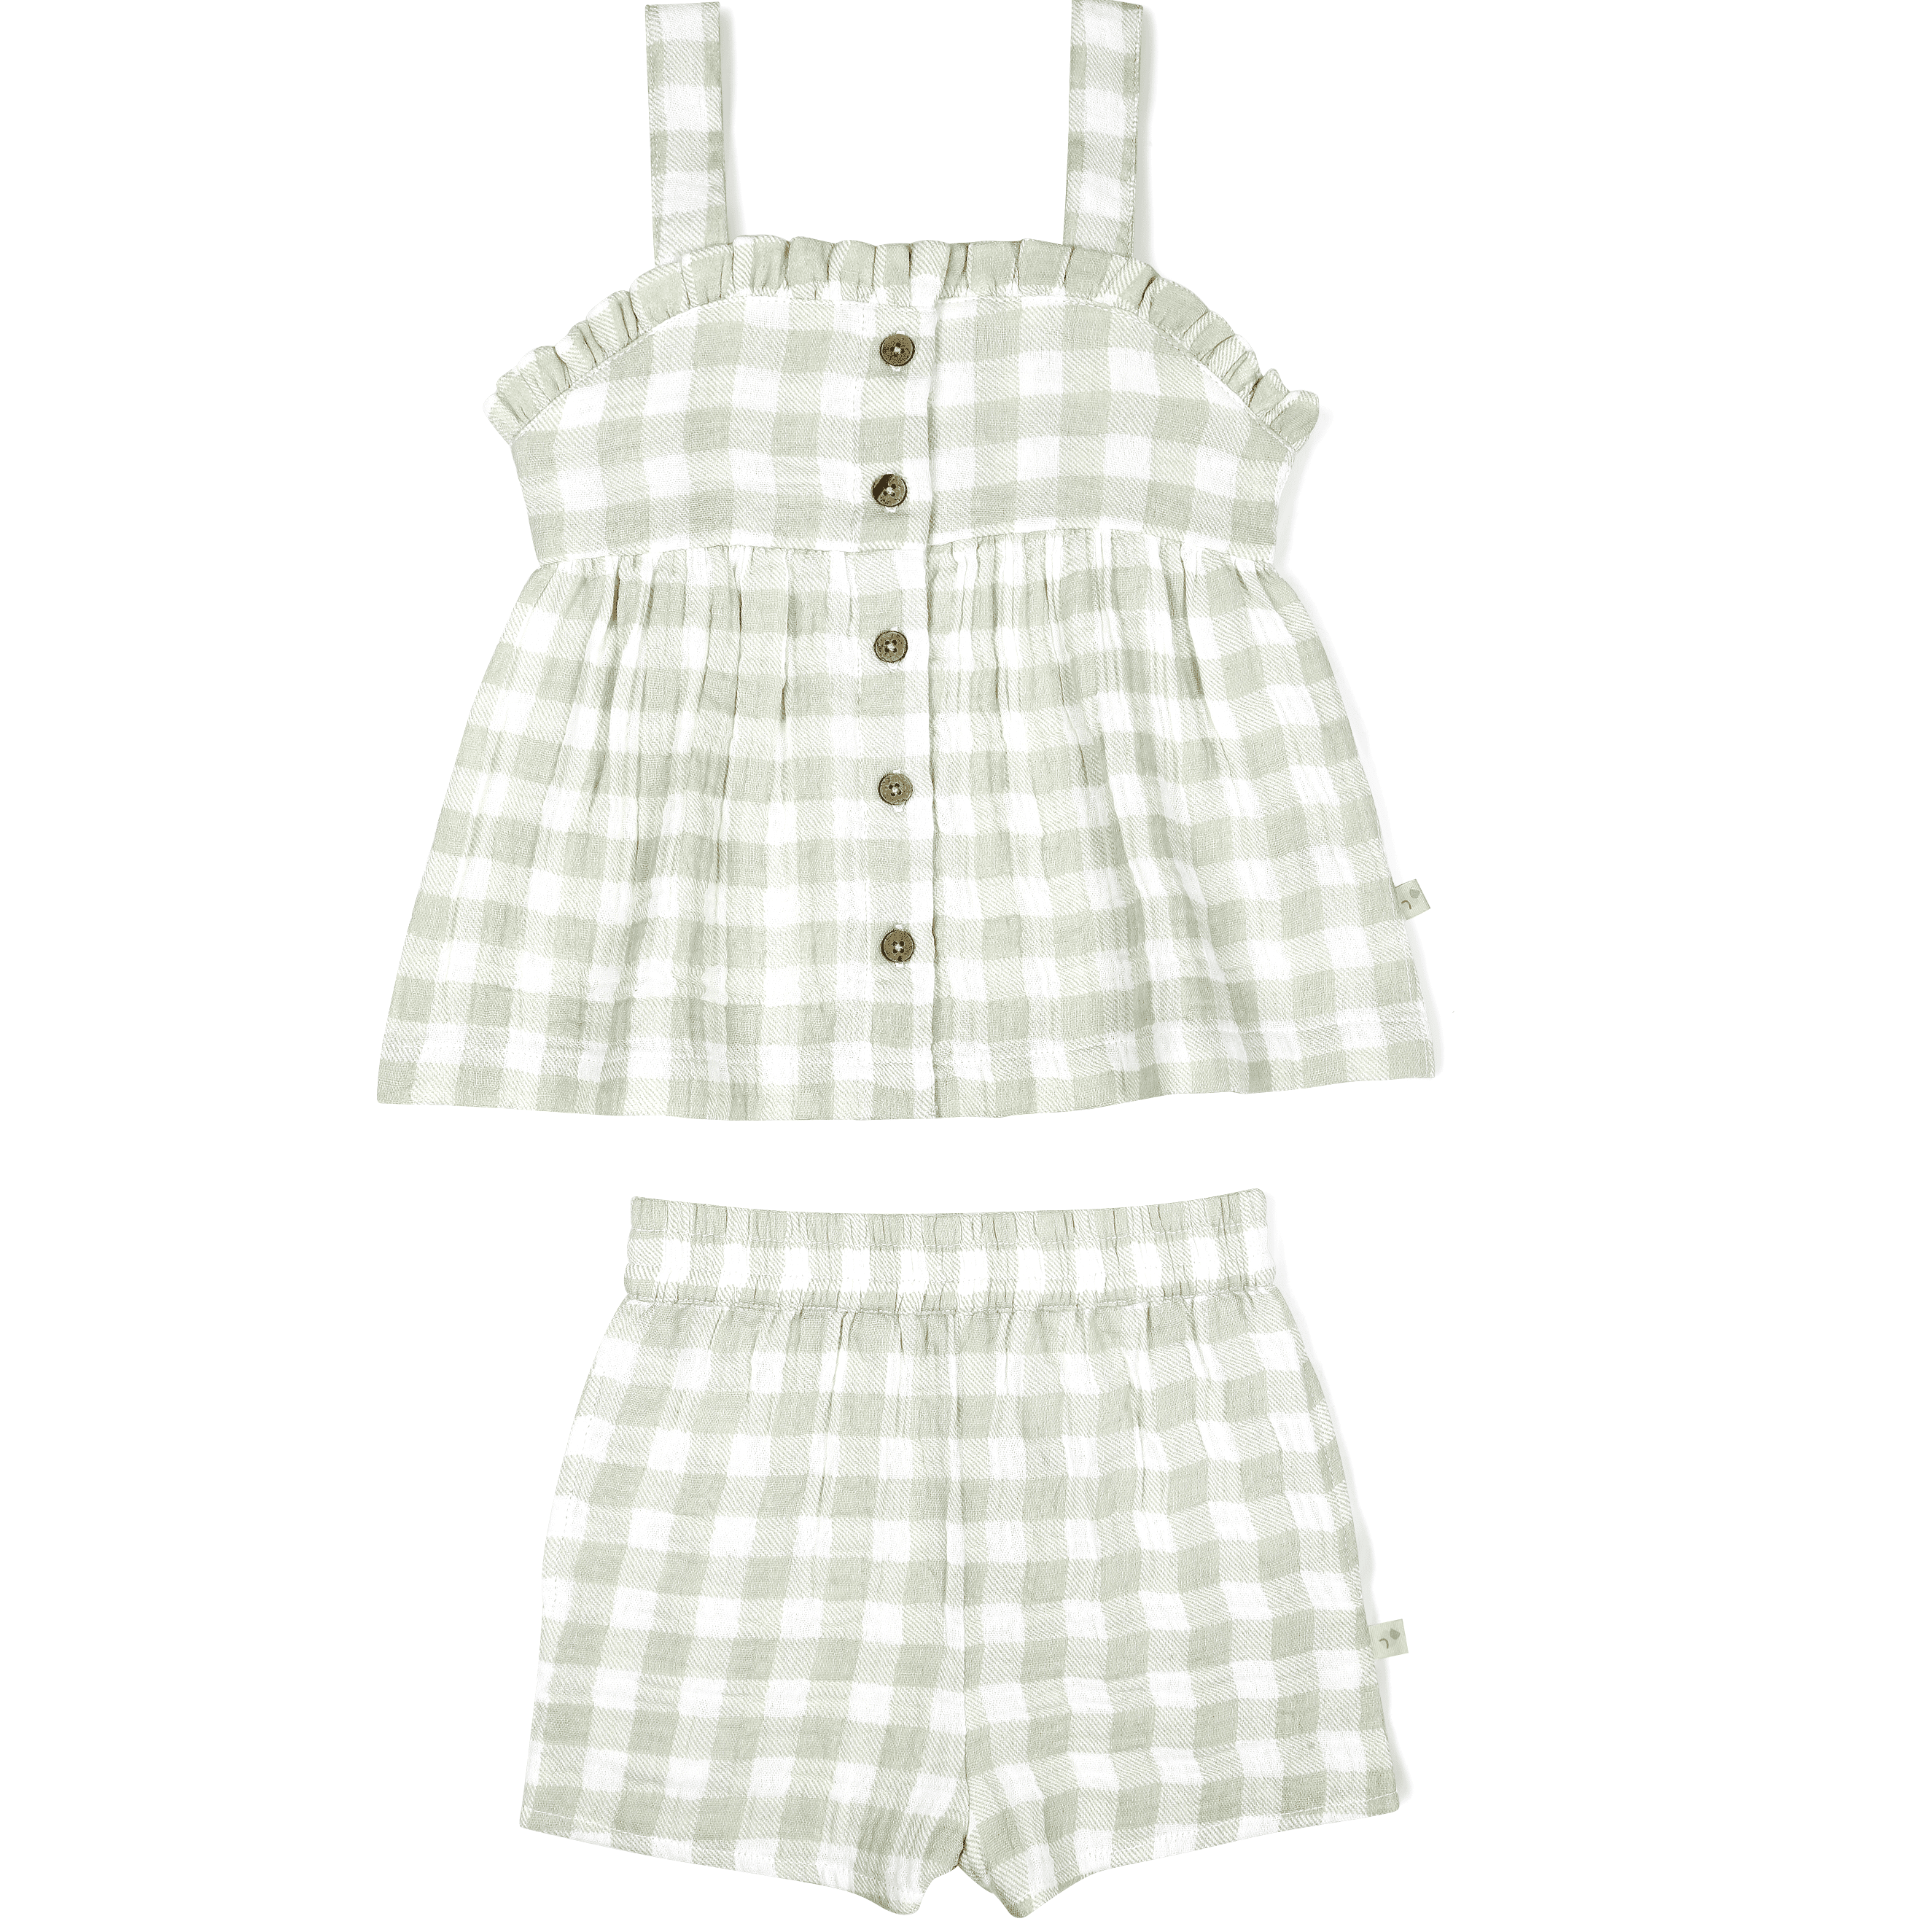 A green and white gingham checked toddler outfit set, featuring a sleeveless dress with button-front detail and matching bloomers for a baby girl - Makemake Organics Organic Muslin Peplum Top and Shorts Set in Gingham.